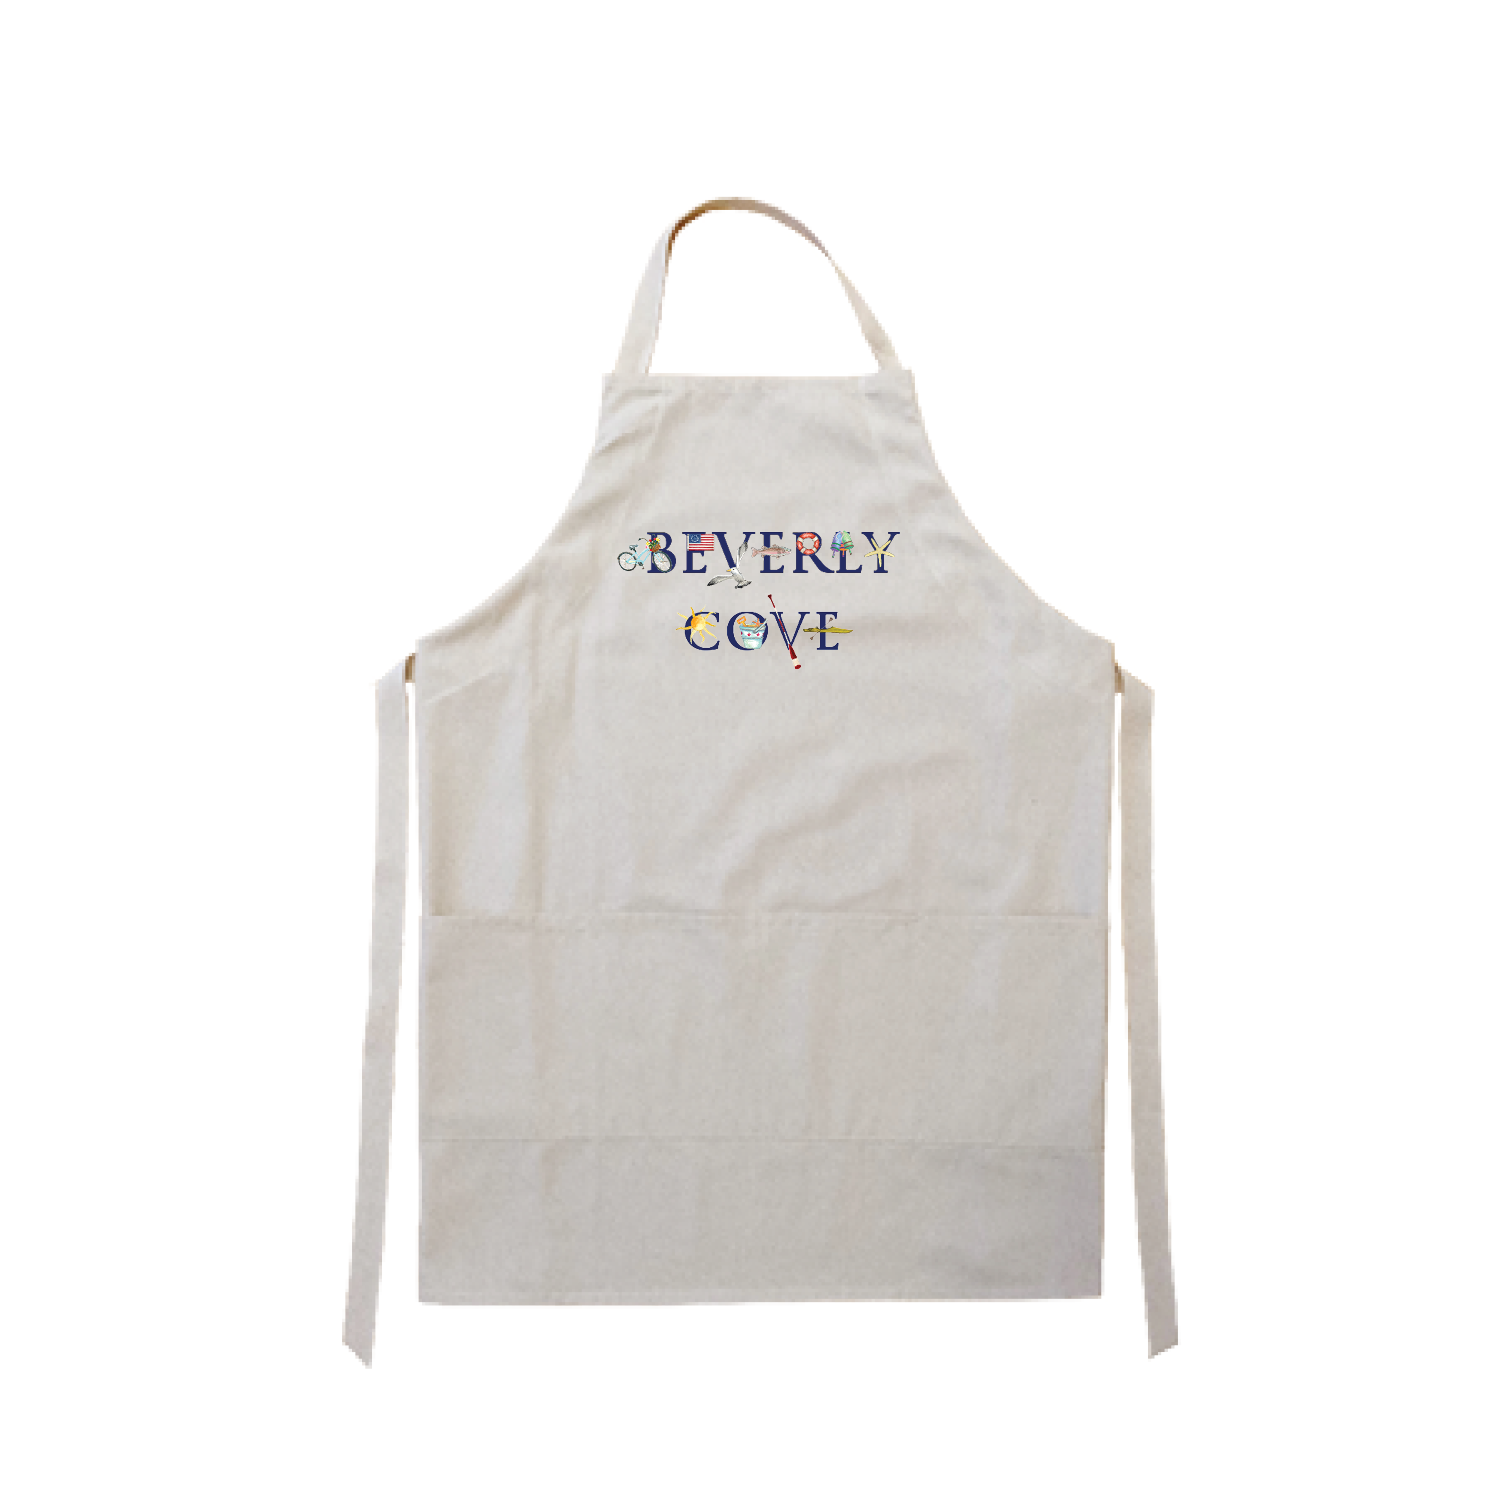 beverly cove apron